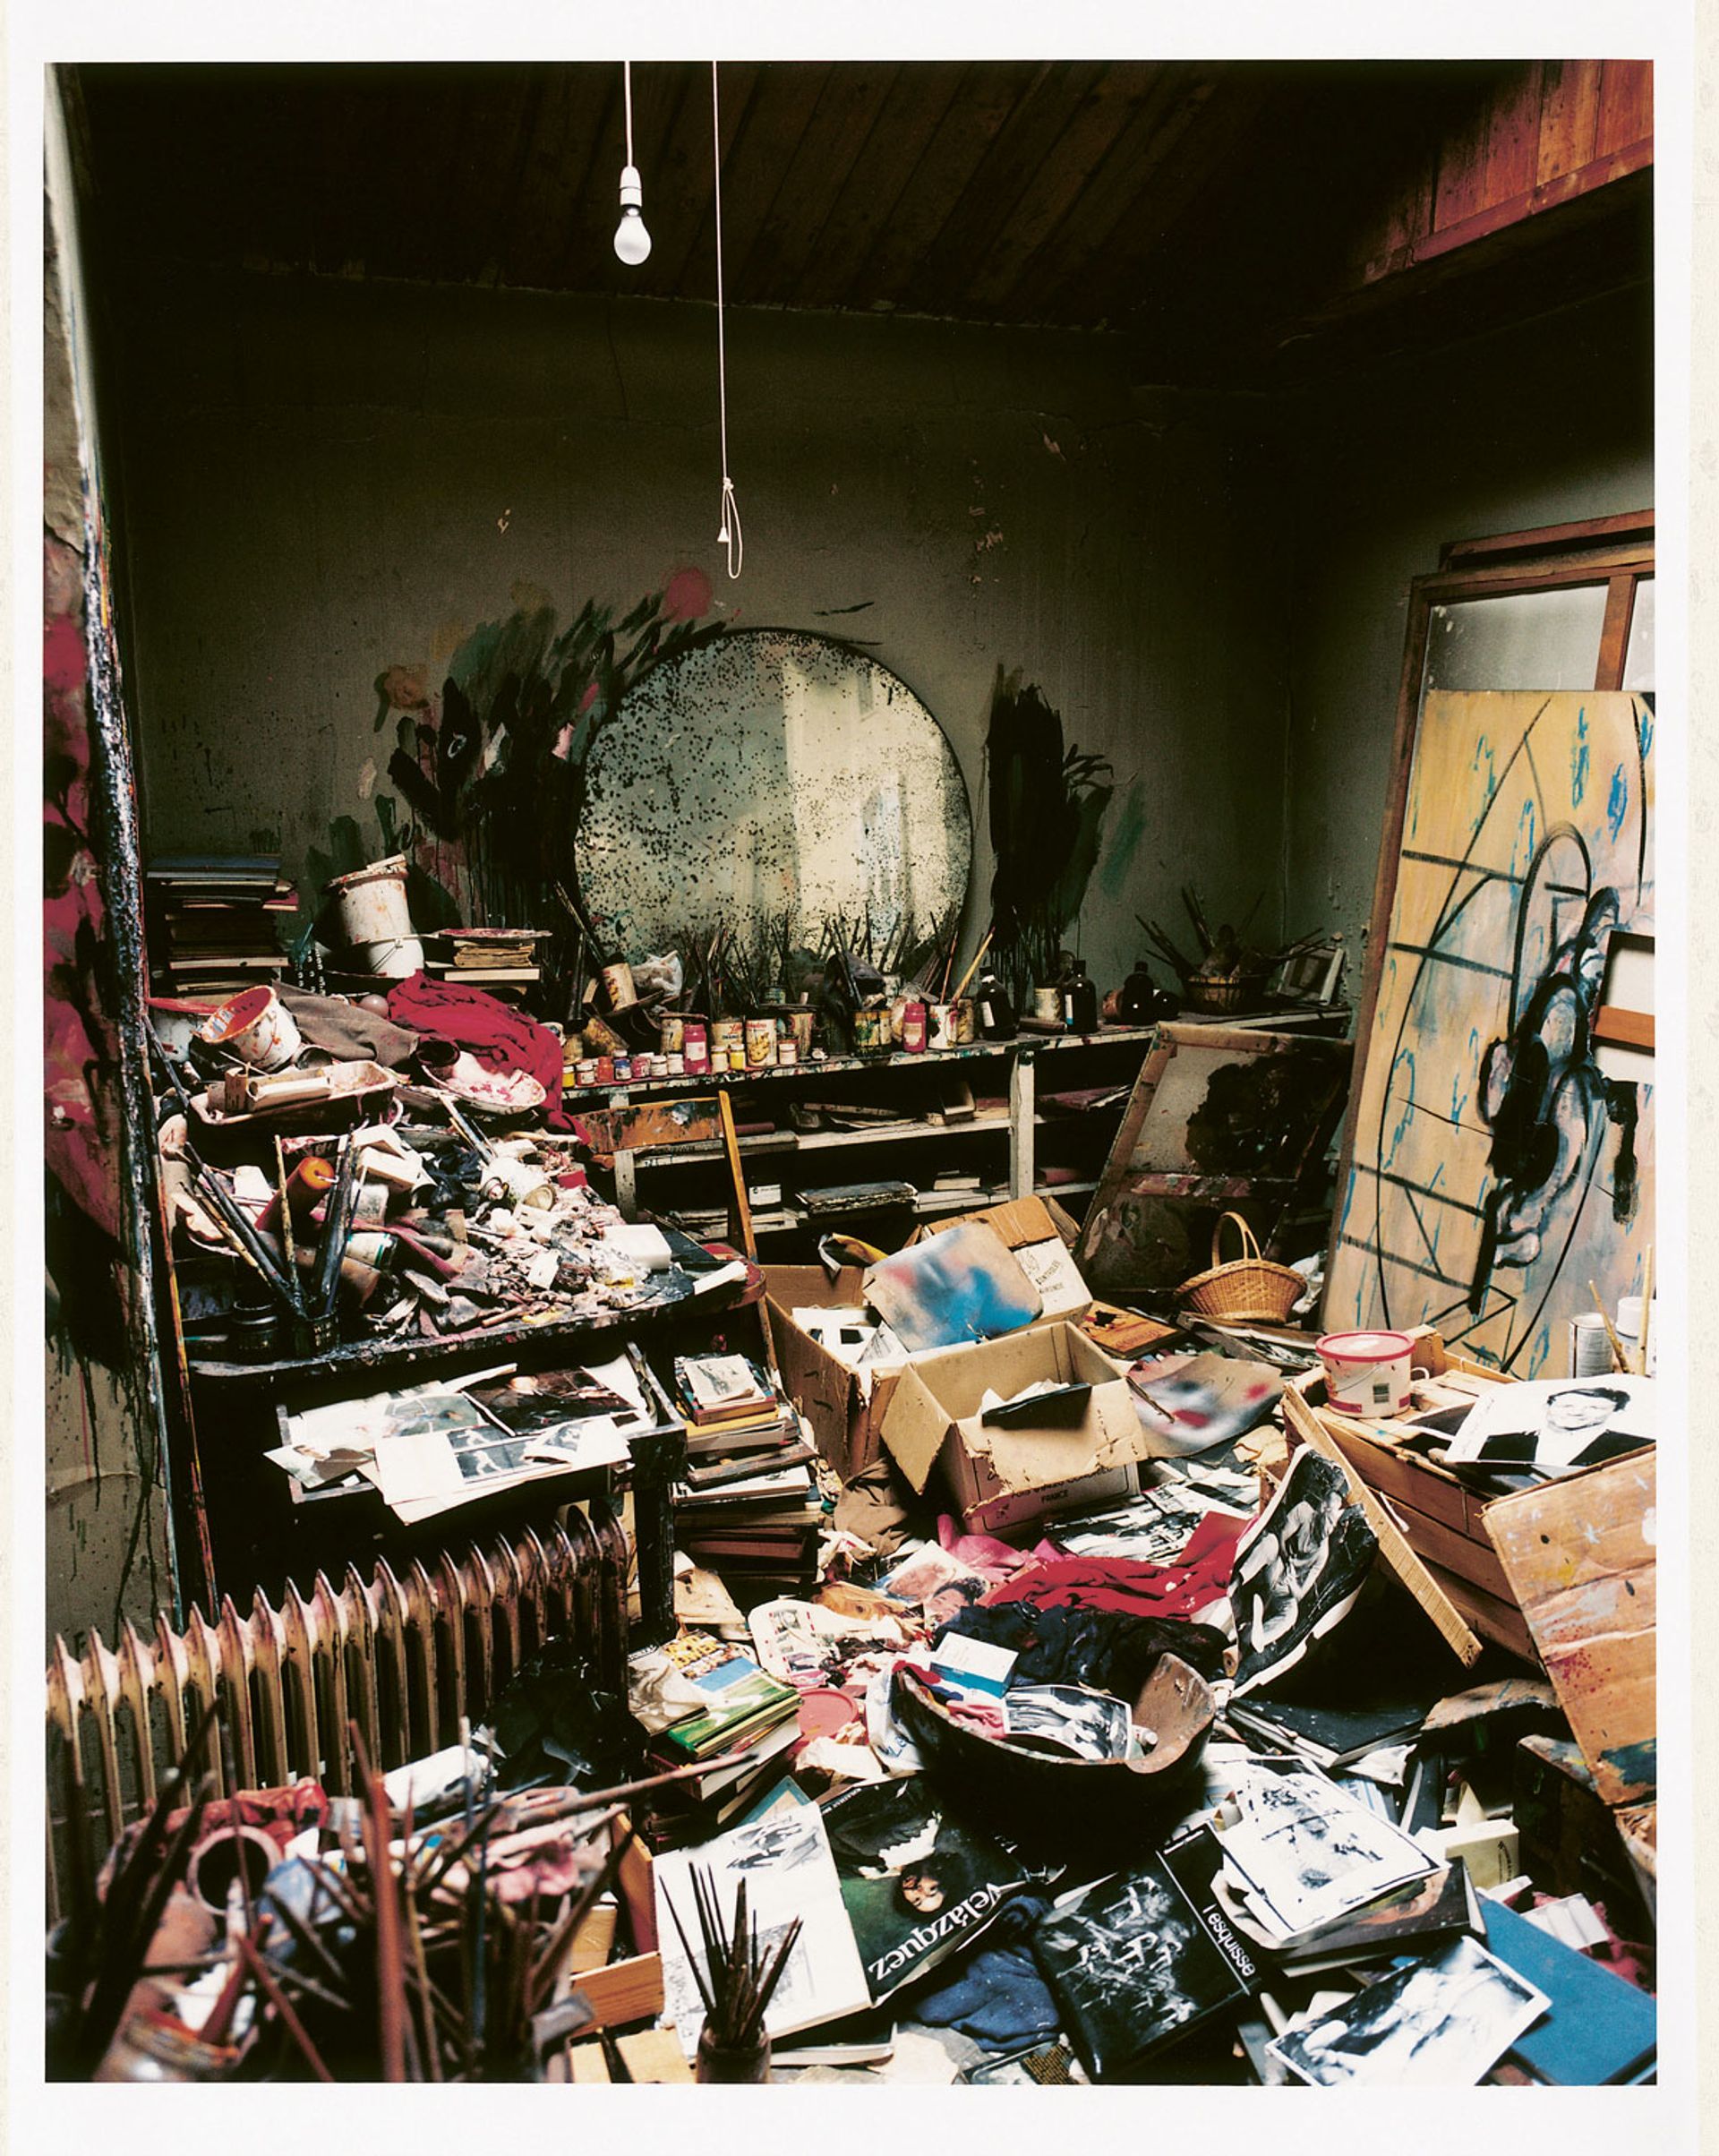 Francis Bacon’s studio at 7 Reece Mews, London, was moved to Dublin after the artist’s death in 1992, where it is on public view at the Hugh Lane Gallery

Photo: Perry Ogden © The Estate of Francis Bacon



